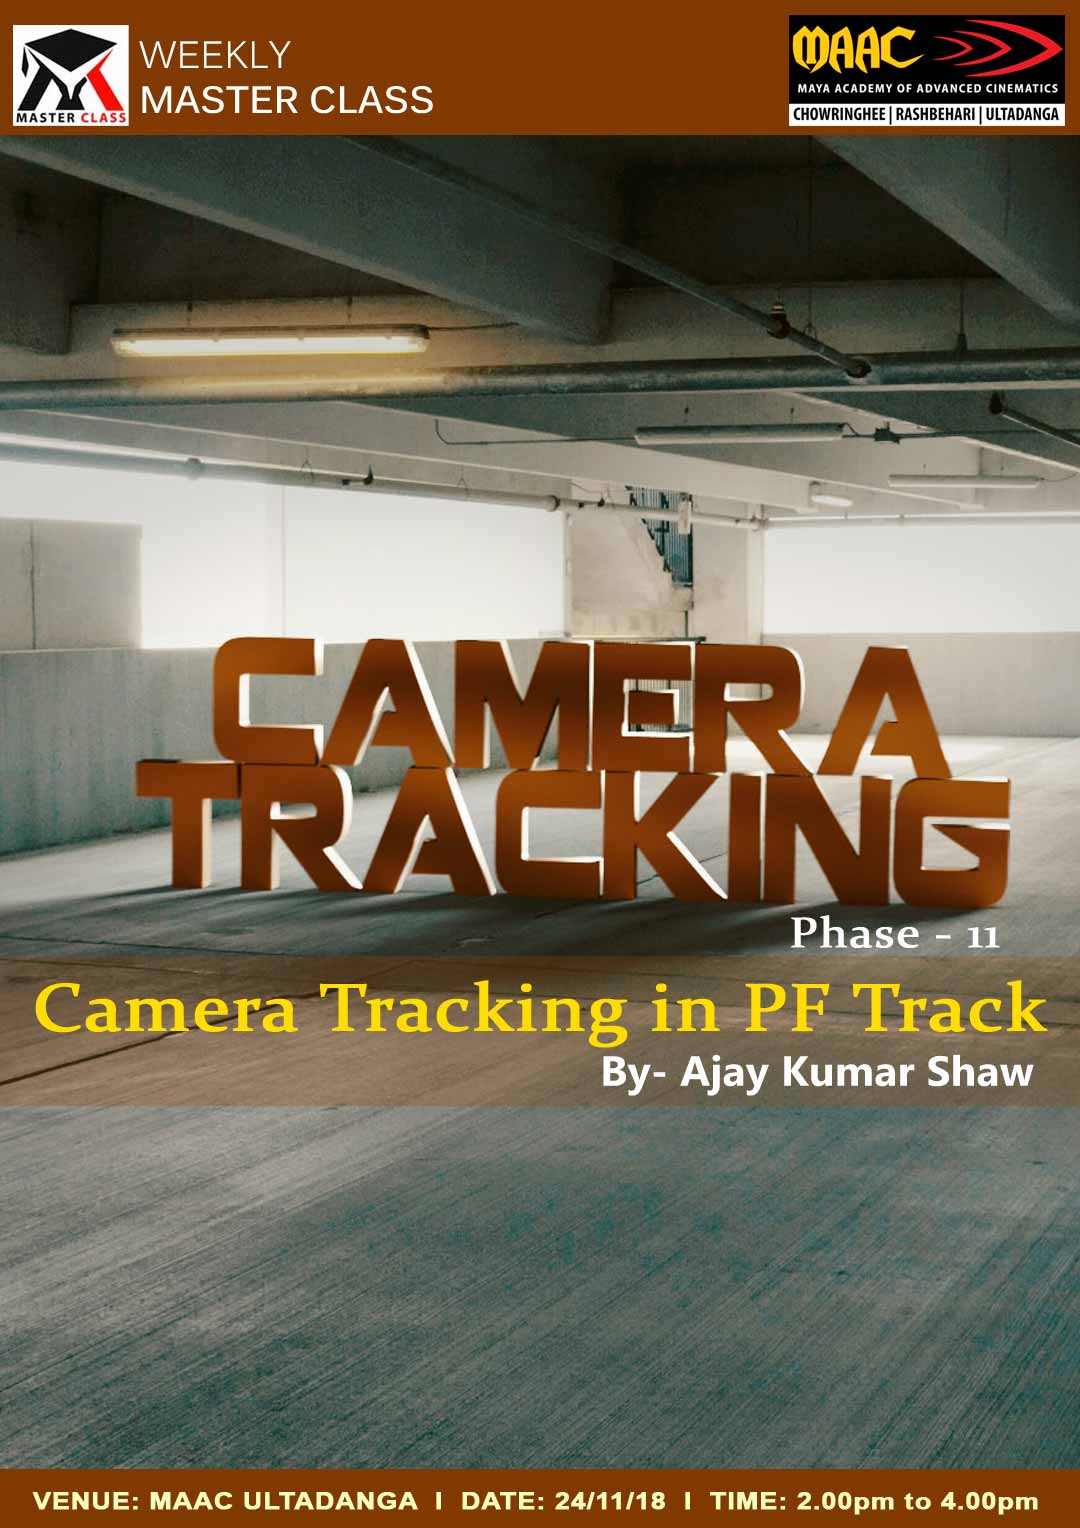 Weekly Master Class on Camera Tracking Phase 2